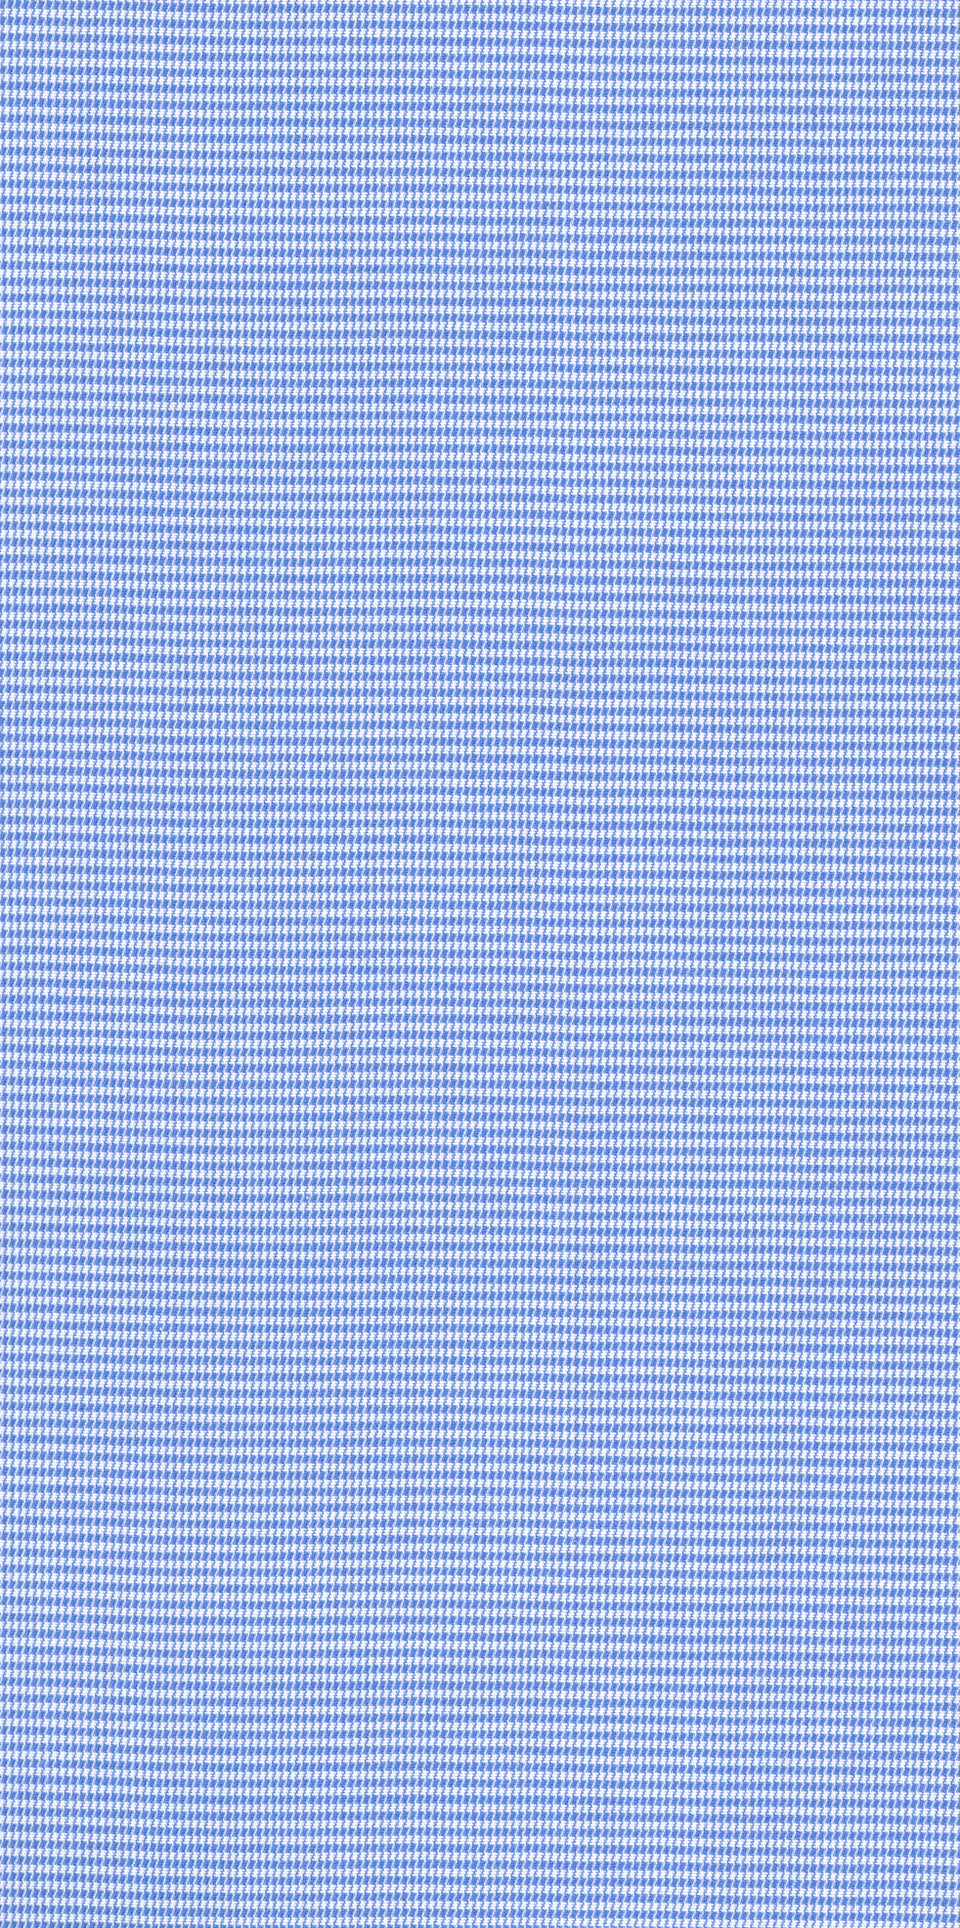 Cotton Blue Houndstooth